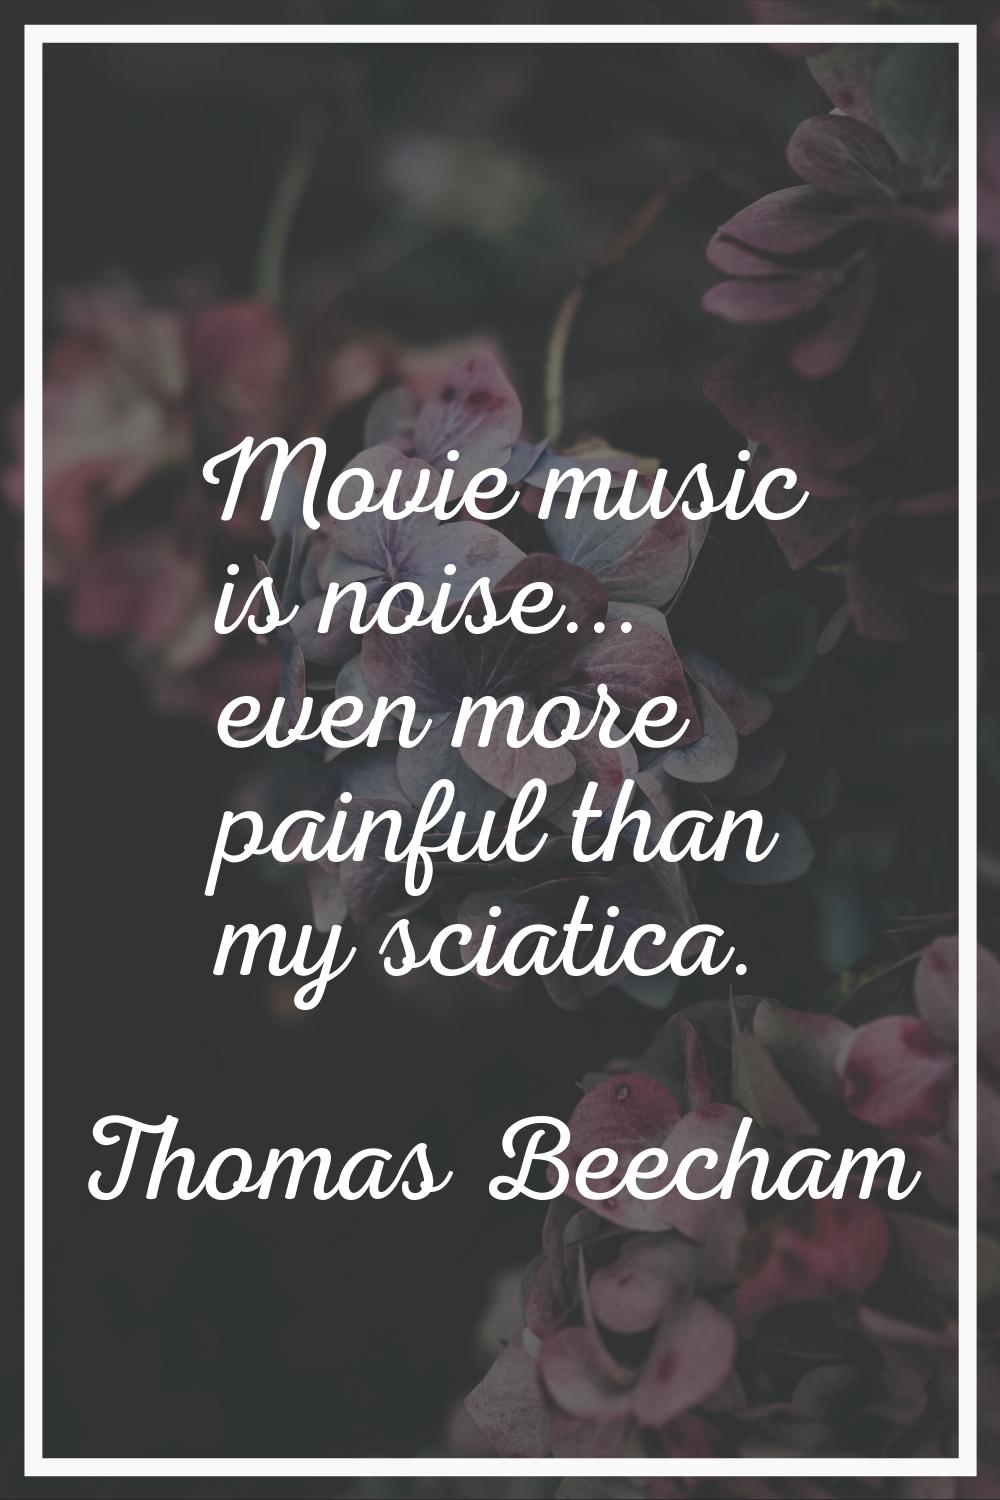 Movie music is noise... even more painful than my sciatica.